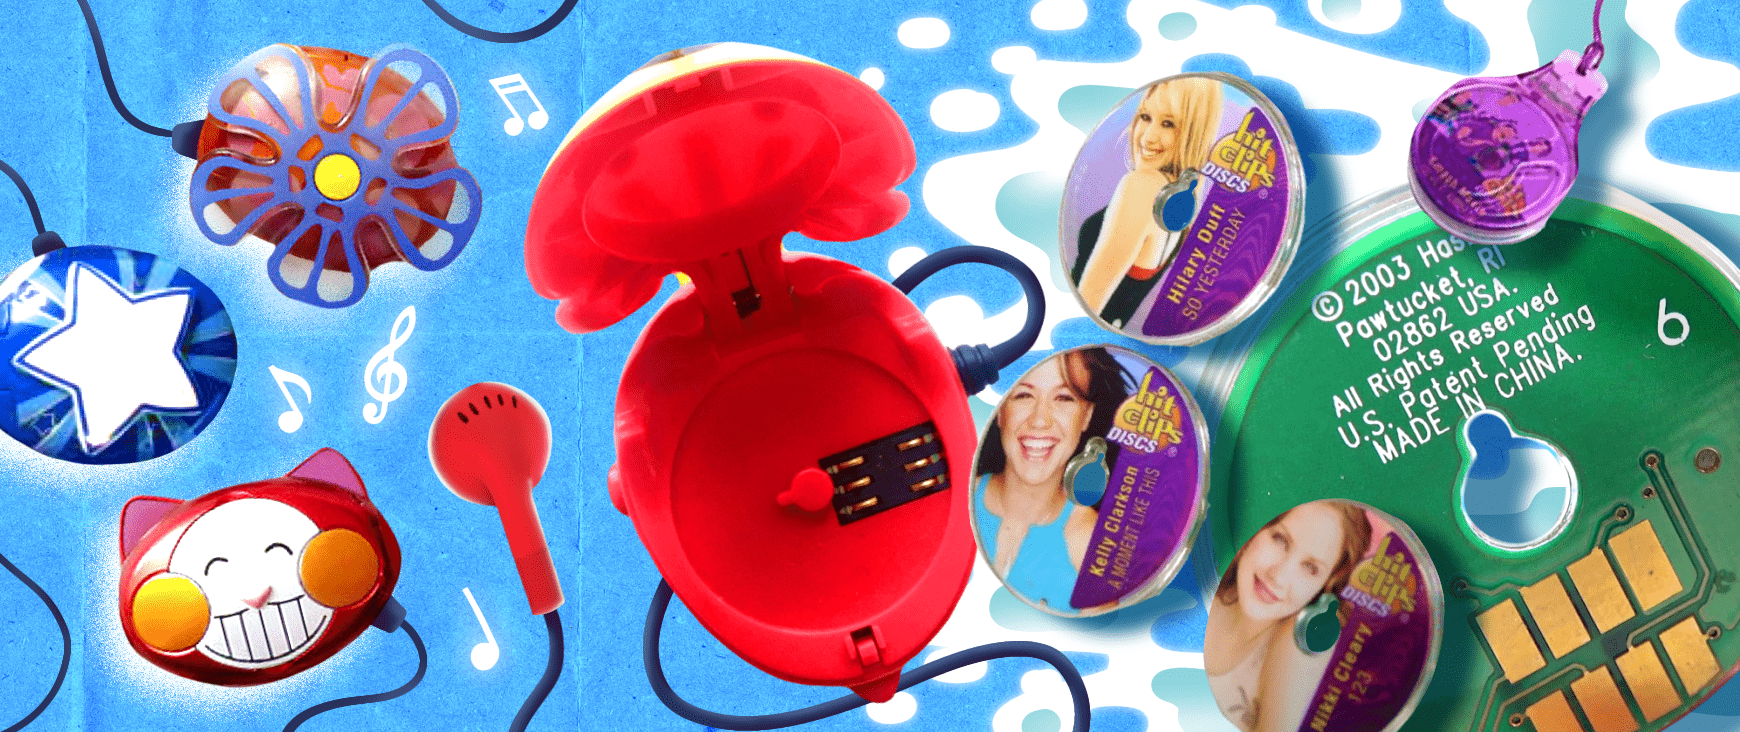 Idk what inspired me to make hit clips asmr but here we are #hitclips , Toys